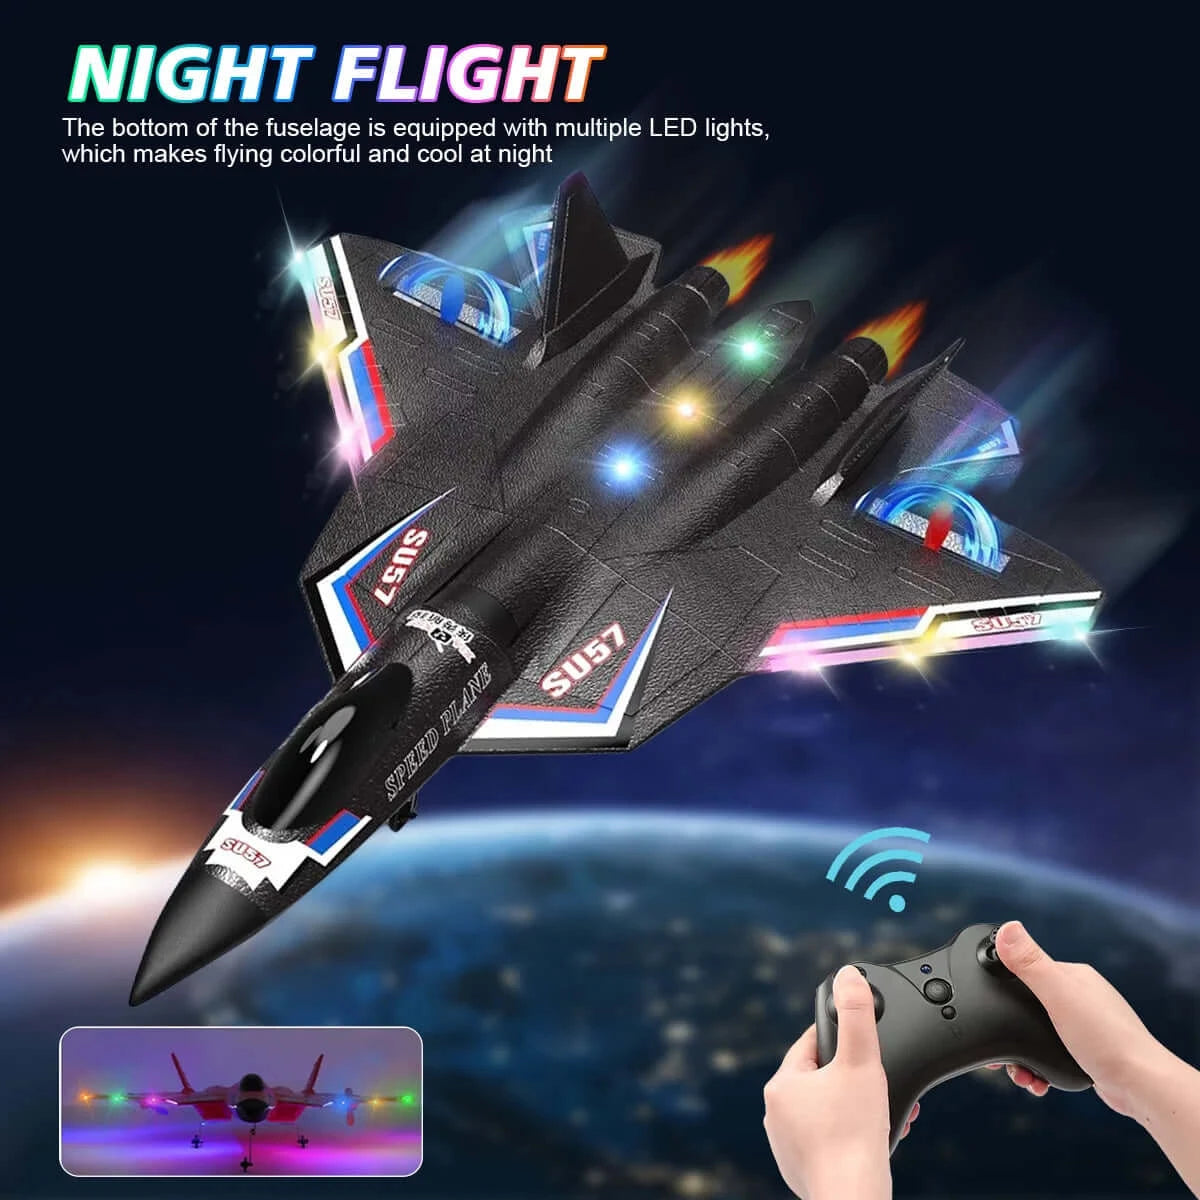 XiaXiu SU57 RC Plane: 2.4G Light-Up Foam Aircraft for Kids - Hand Thrown, Fixed Wing Toy | Kidstoylover